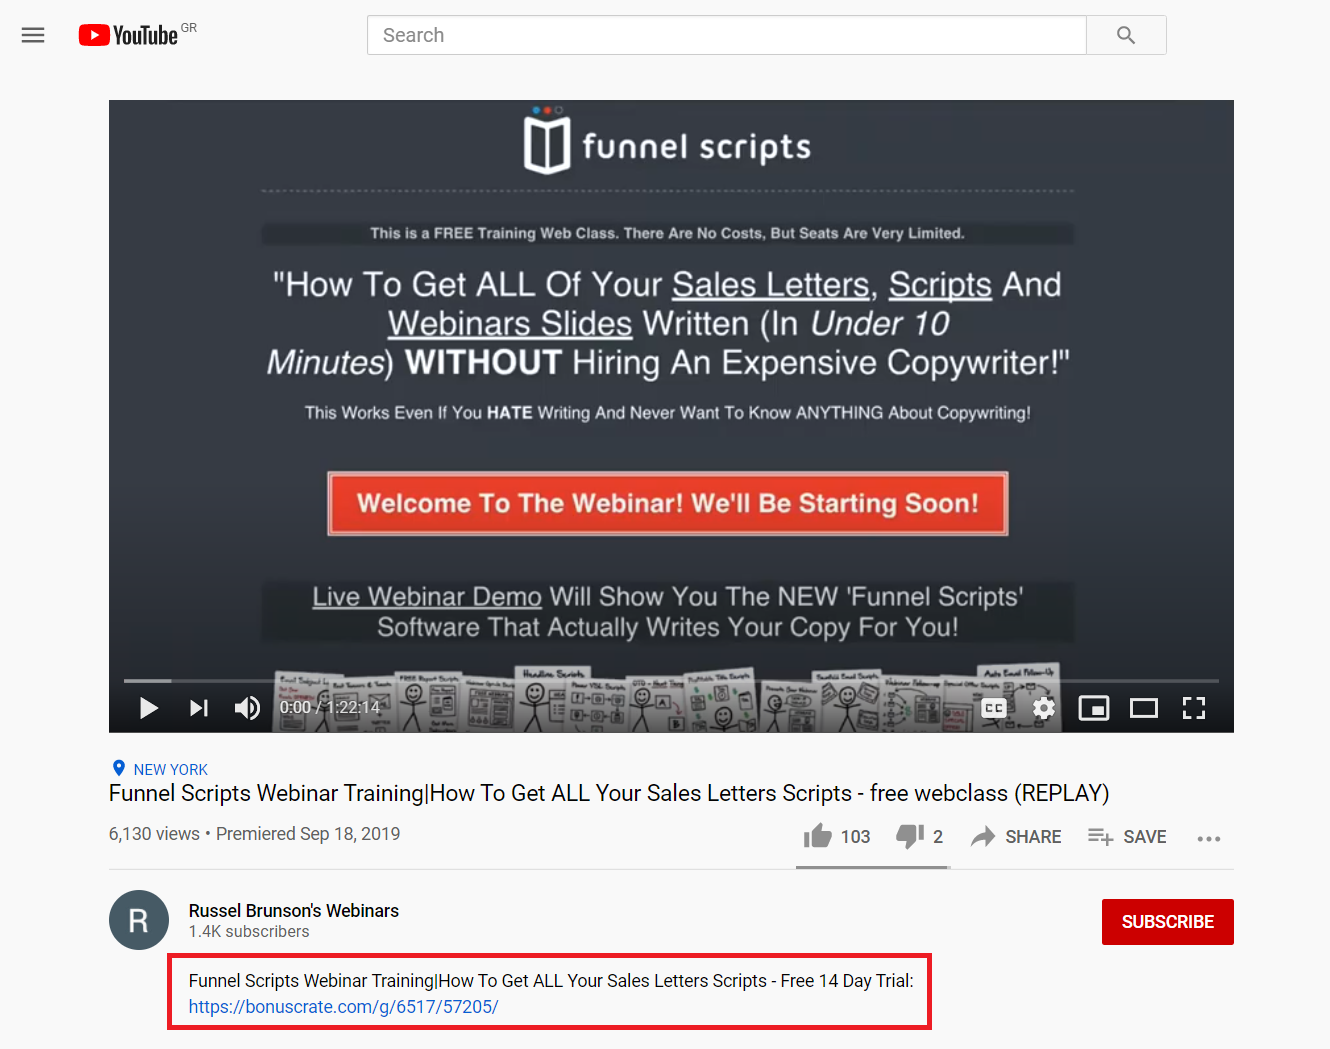 youtube conversion example by clickfunnels